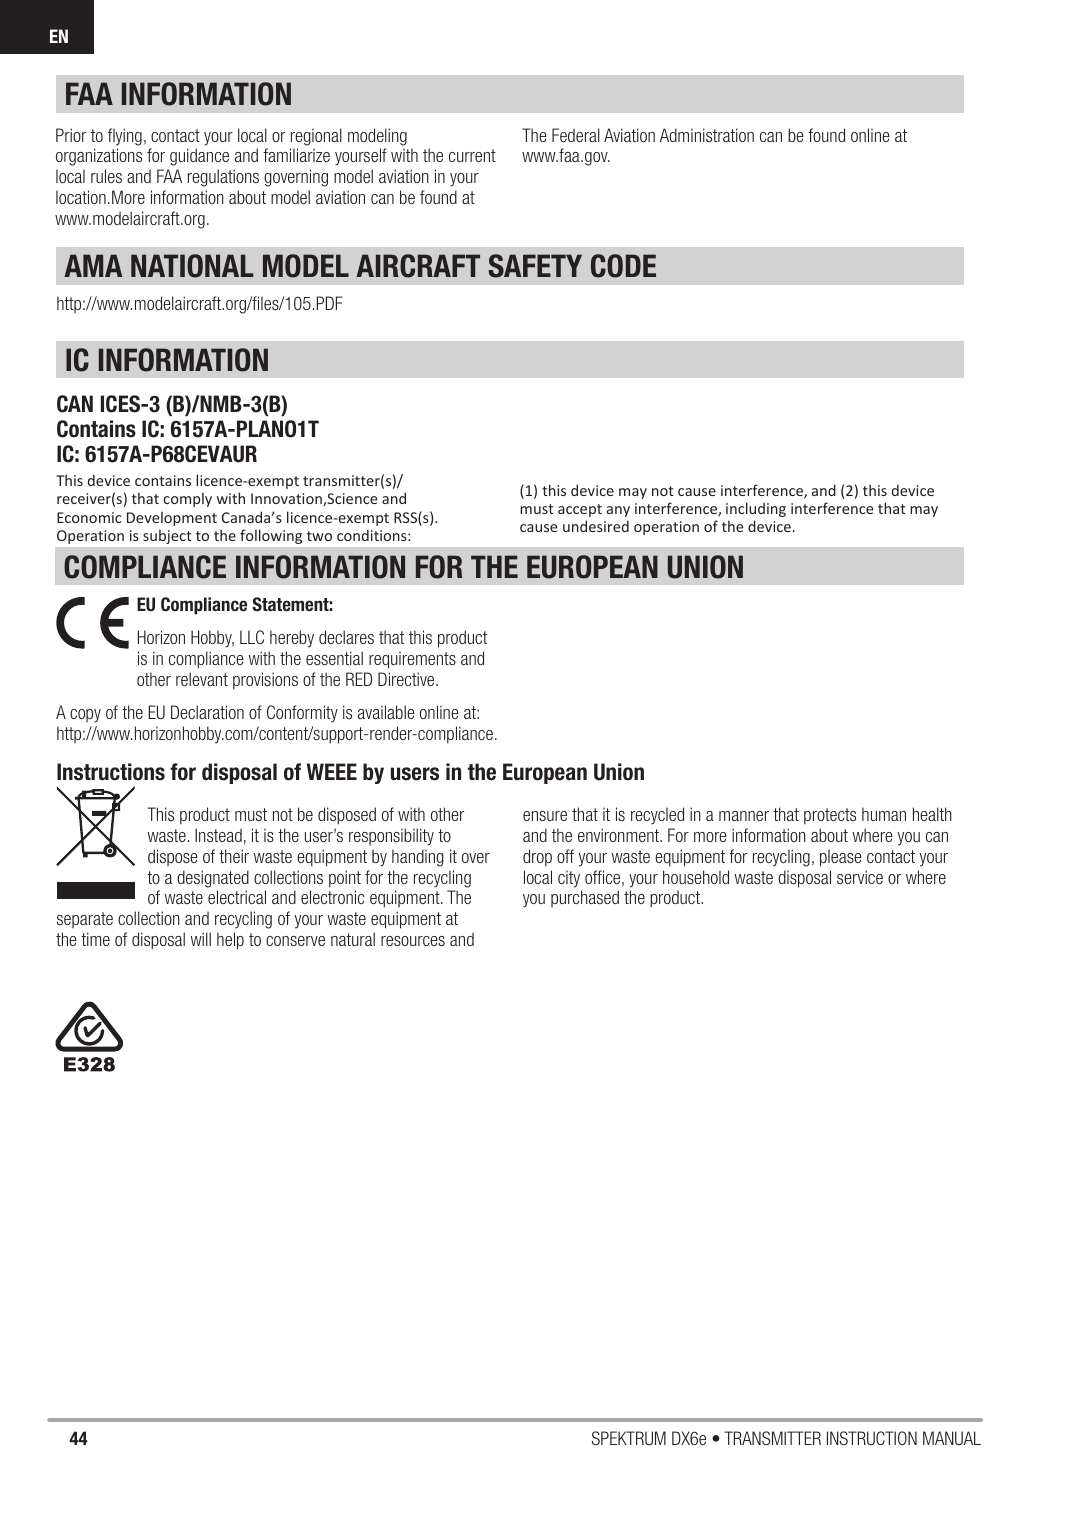 44 SPEKTRUM DX6e • TRANSMITTER INSTRUCTION MANUALENCOMPLIANCE INFORMATION FOR THE EUROPEAN UNION(1) this device may not cause interference, and (2) this device must accept any interference, including interference that may cause undesired operation of the device.IC INFORMATIONCAN ICES-3 (B)/NMB-3(B)Contains IC: 6157A-PLANO1TIC: 6157A-P68CEVAURThis device contains licence-exempt transmitter(s)/receiver(s) that comply with Innovation,Science and Economic Development Canada’s licence-exempt RSS(s). Operation is subject to the following two conditions:AMA NATIONAL MODEL AIRCRAFT SAFETY CODEhttp://www.modelaircraft.org/ﬁ les/105.PDFFAA INFORMATIONPrior to ﬂ ying, contact your local or regional modeling organizations for guidance and familiarize yourself with the current local rules and FAA regulations governing model aviation in your location.More information about model aviation can be found atwww.modelaircraft.org.The Federal Aviation Administration can be found online atwww.faa.gov.Instructions for disposal of WEEE by users in the European UnionThis product must not be disposed of with other waste. Instead, it is the user’s responsibility to dispose of their waste equipment by handing it over to a designated collections point for the recycling of waste electrical and electronic equipment. The separate collection and recycling of your waste equipment at the time of disposal will help to conserve natural resources and ensure that it is recycled in a manner that protects human health and the environment. For more information about where you can drop off your waste equipment for recycling, please contact your local city ofﬁ ce, your household waste disposal service or where you purchased the product.EU Compliance Statement: Horizon Hobby, LLC hereby declares that this product is in compliance with the essential requirements and other relevant provisions of the RED Directive. A copy of the EU Declaration of Conformity is available online at:http://www.horizonhobby.com/content/support-render-compliance.